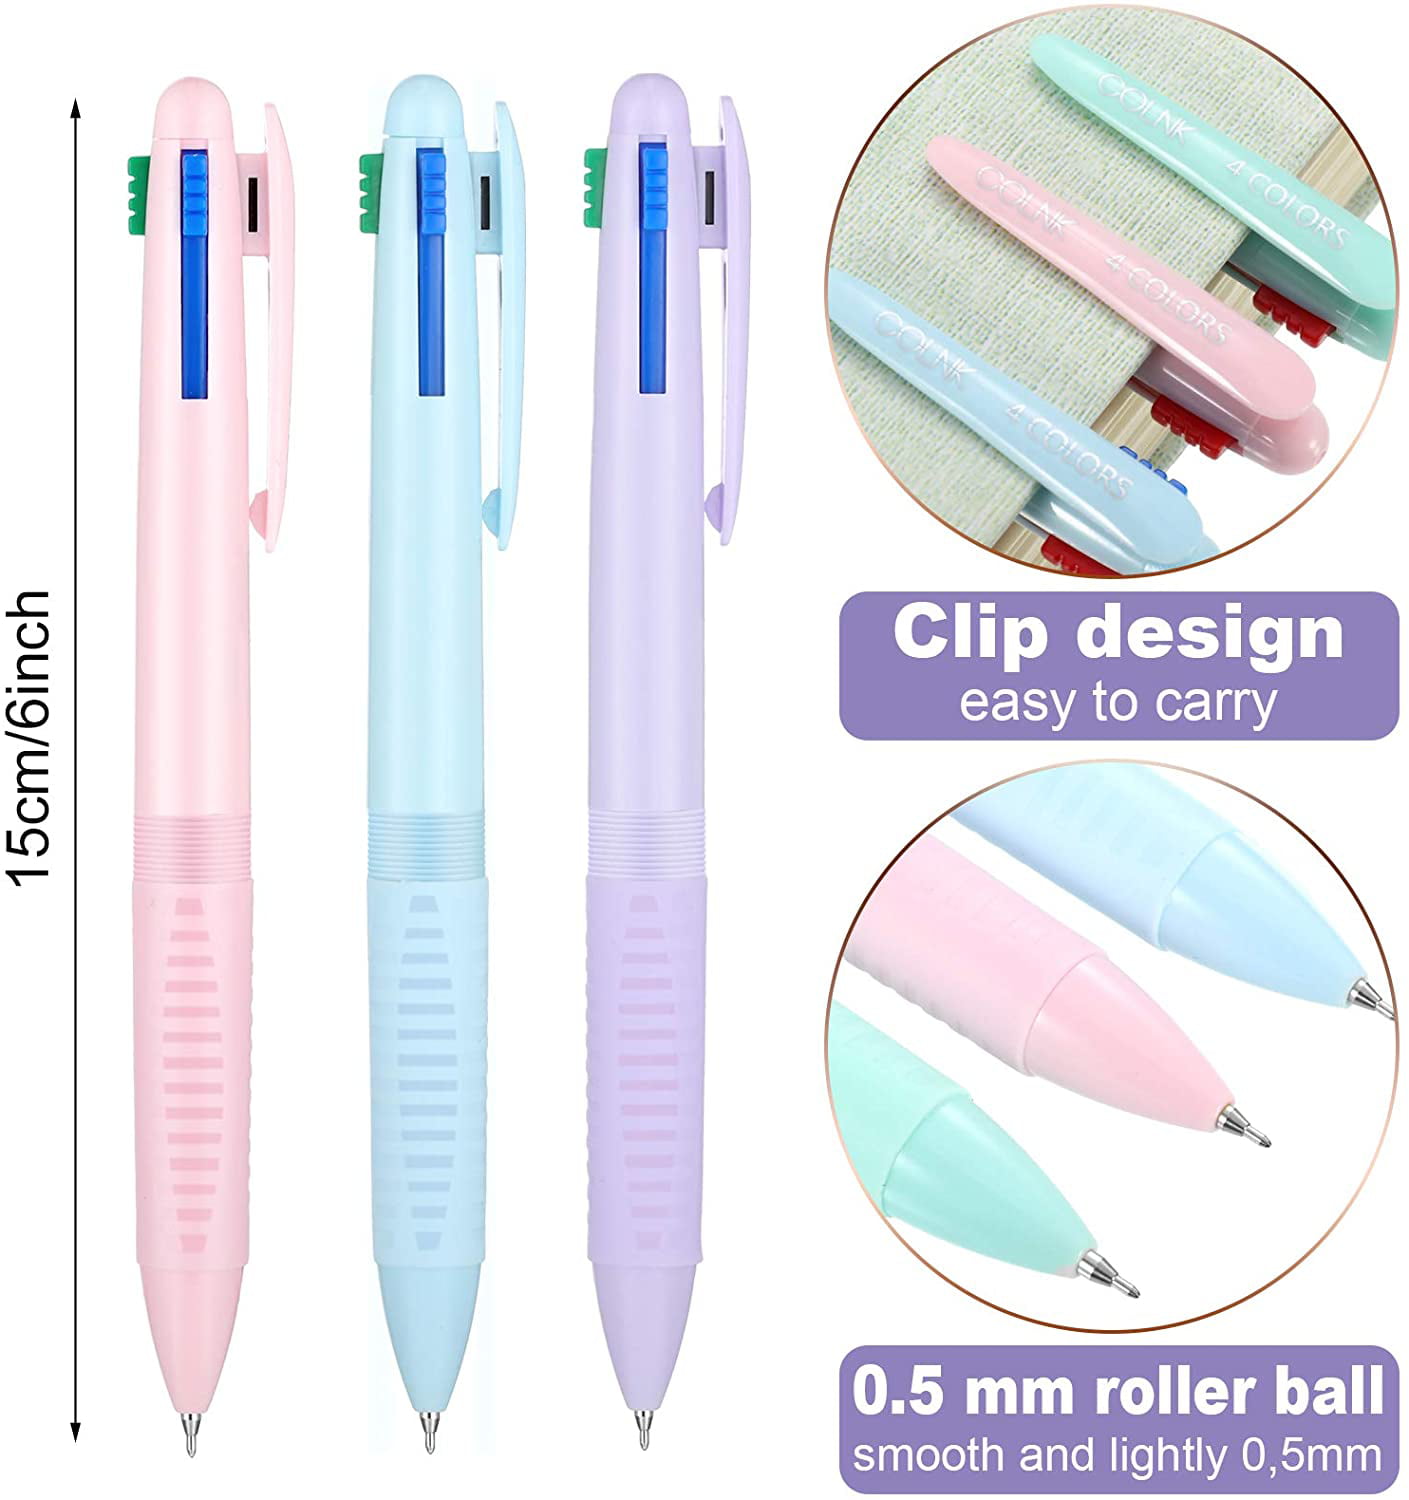 New Design 6 in 1 Color Ballpoint Pen Multi-color Ball Point Pens School Supply 